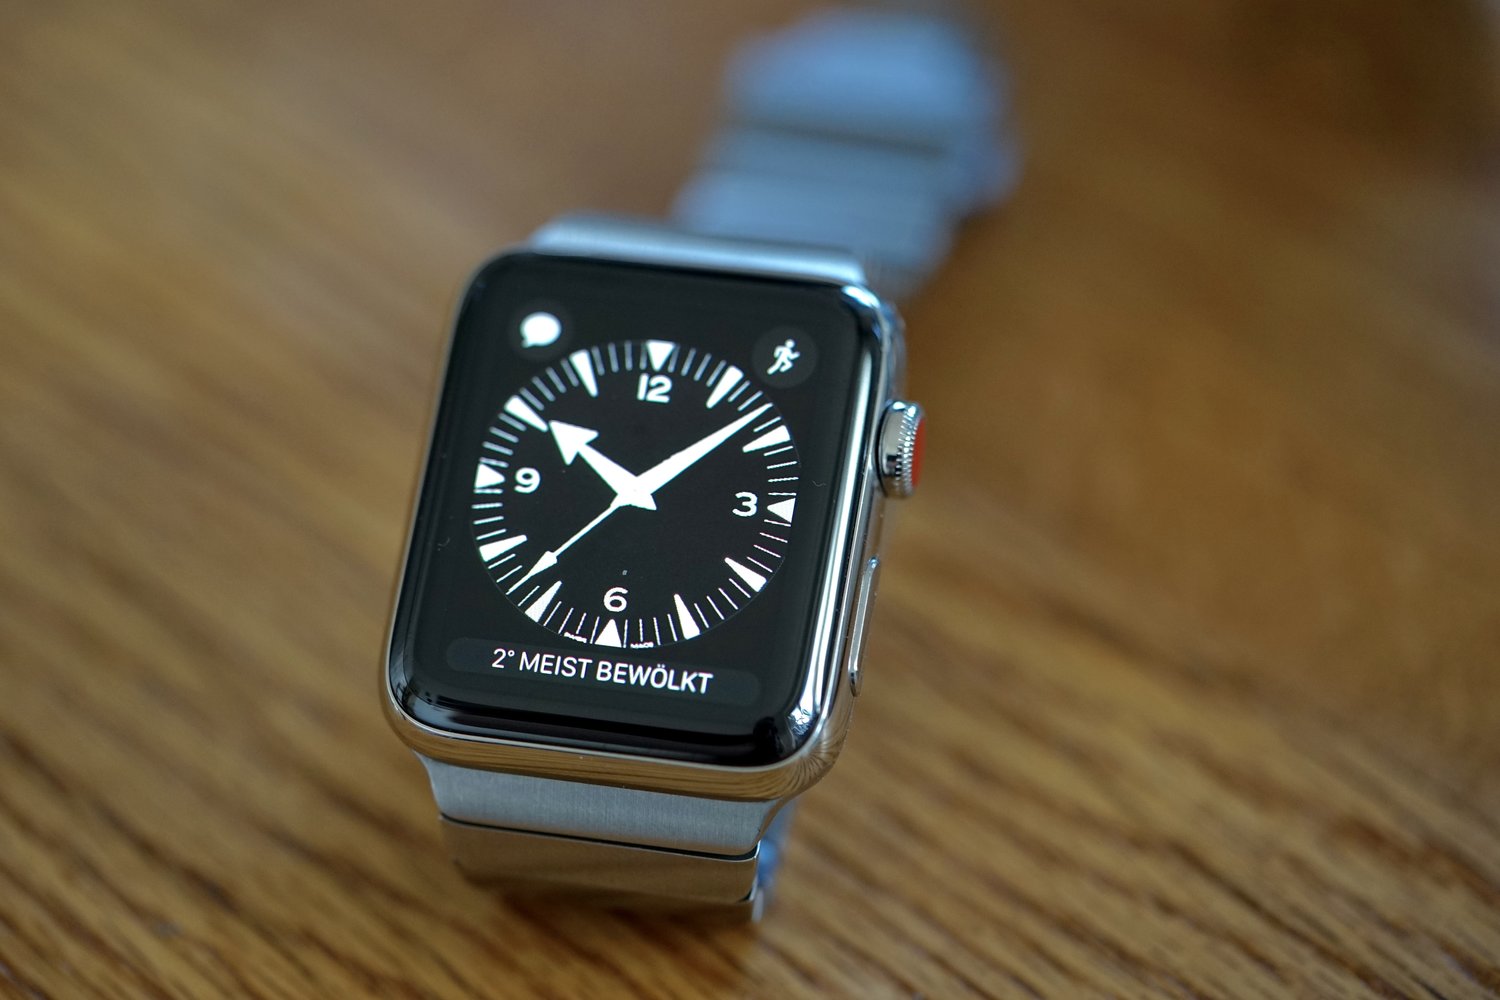 Third-party Watch Faces For Apple Watch 